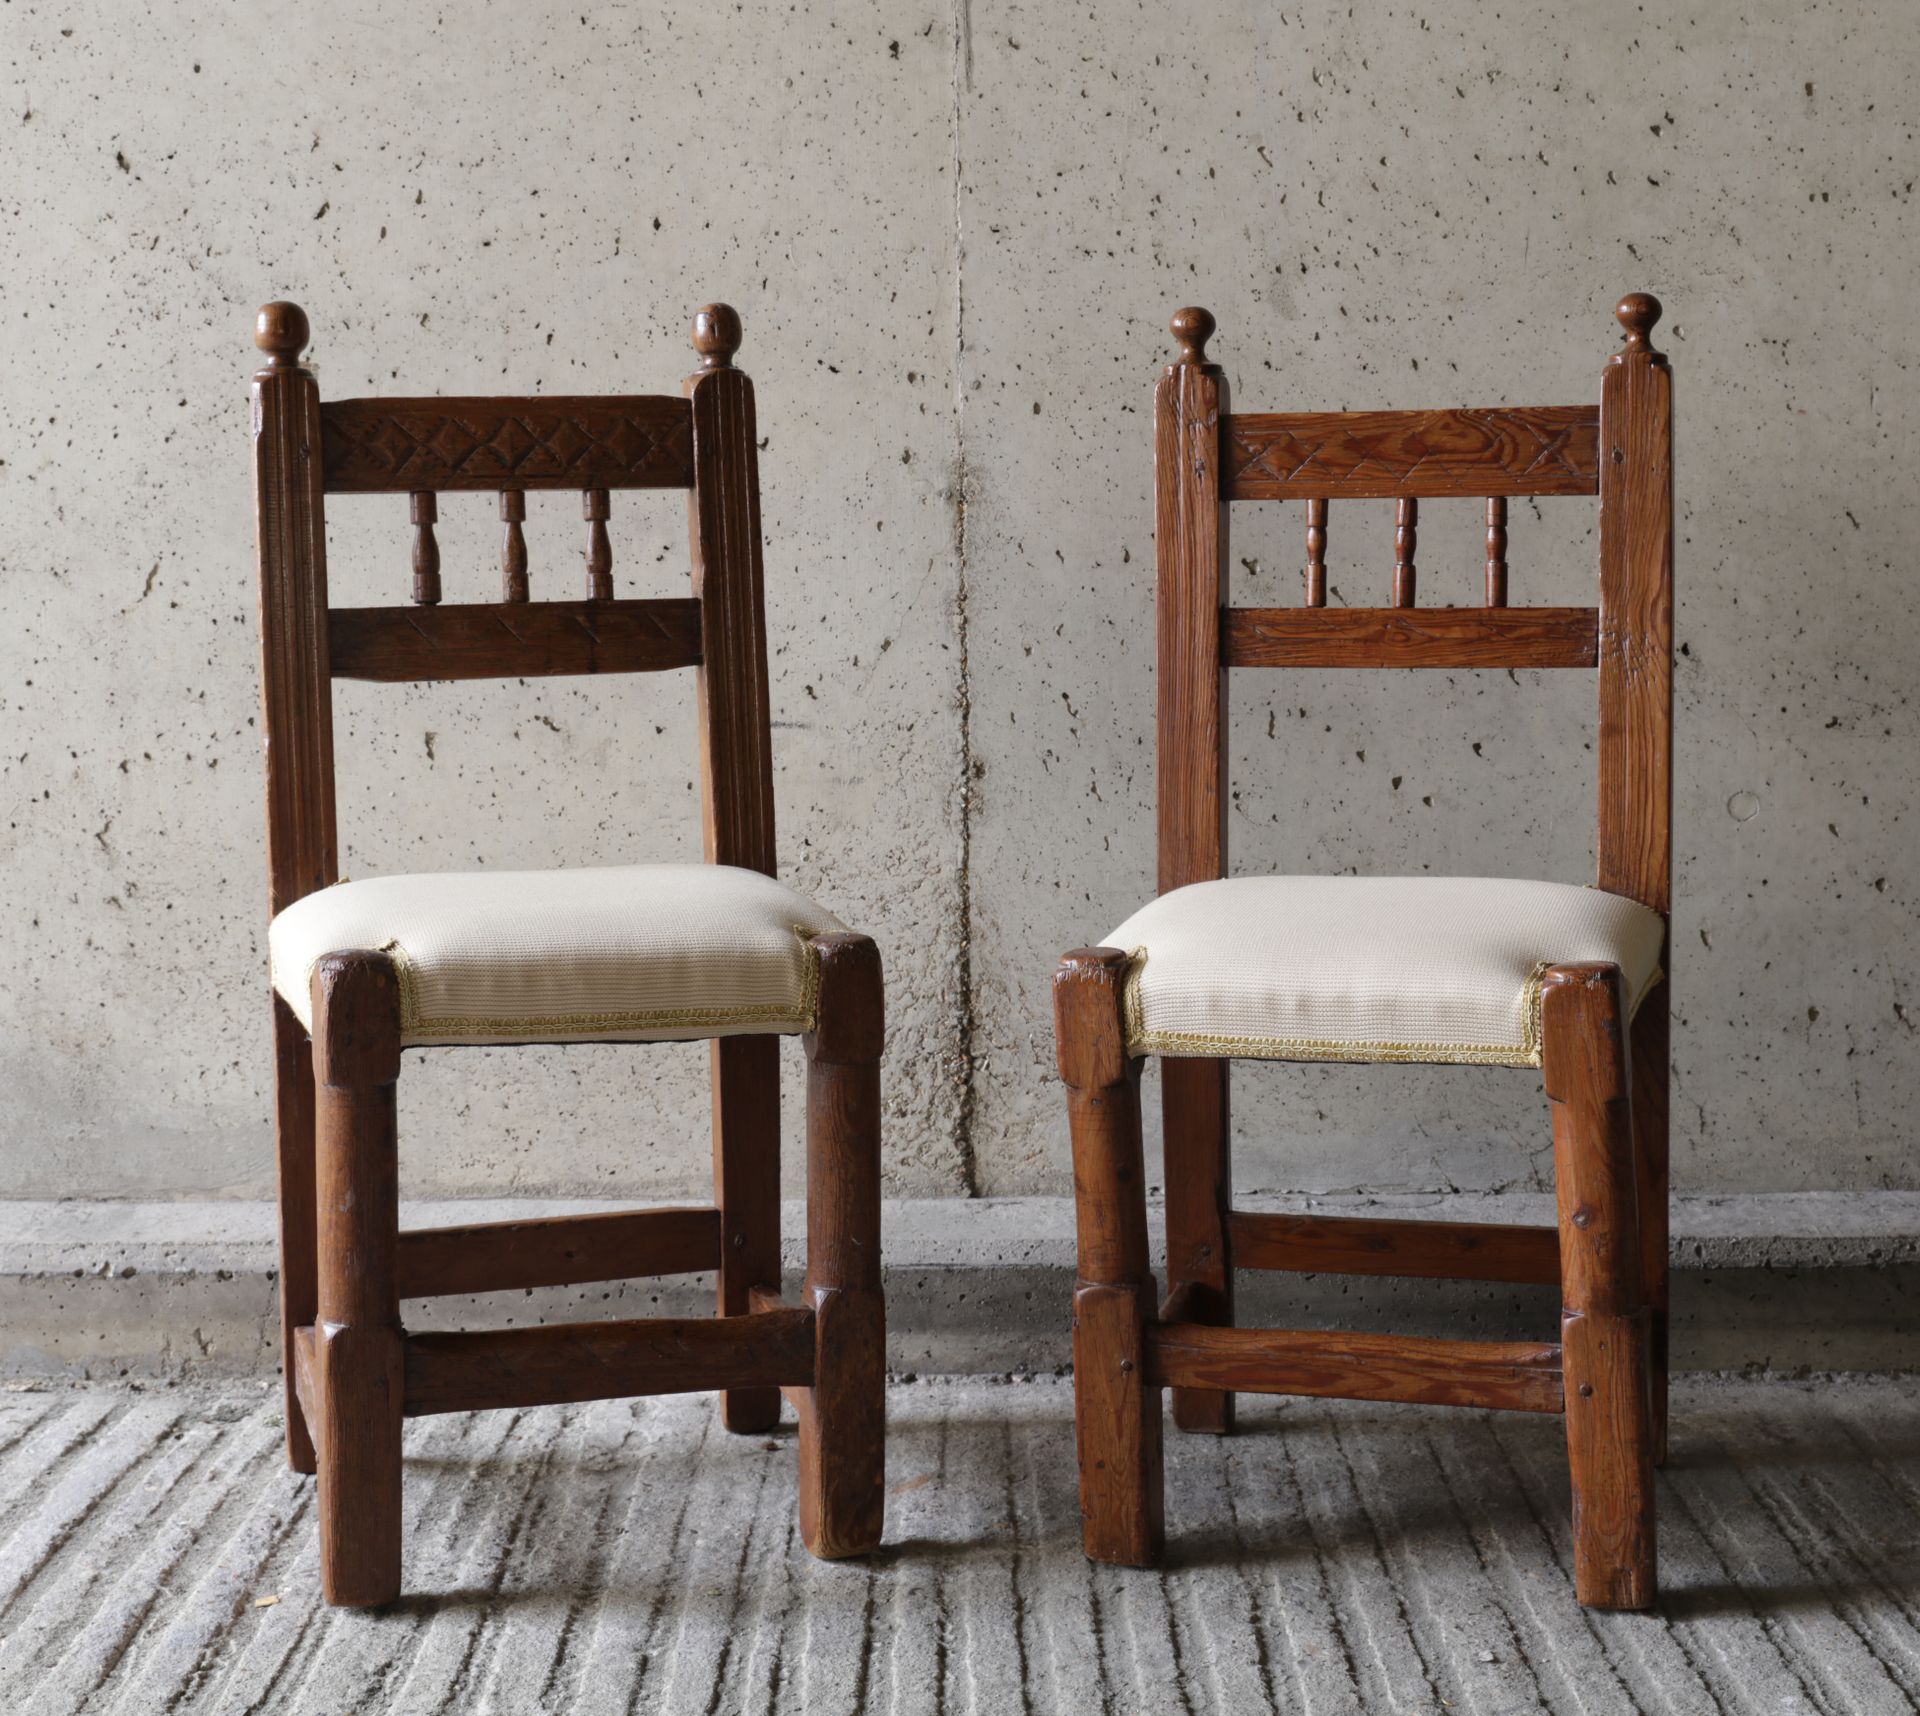 VARIA Pair of charming chairs in oak. Covered with white fabric
Paar charmante s&hellip;